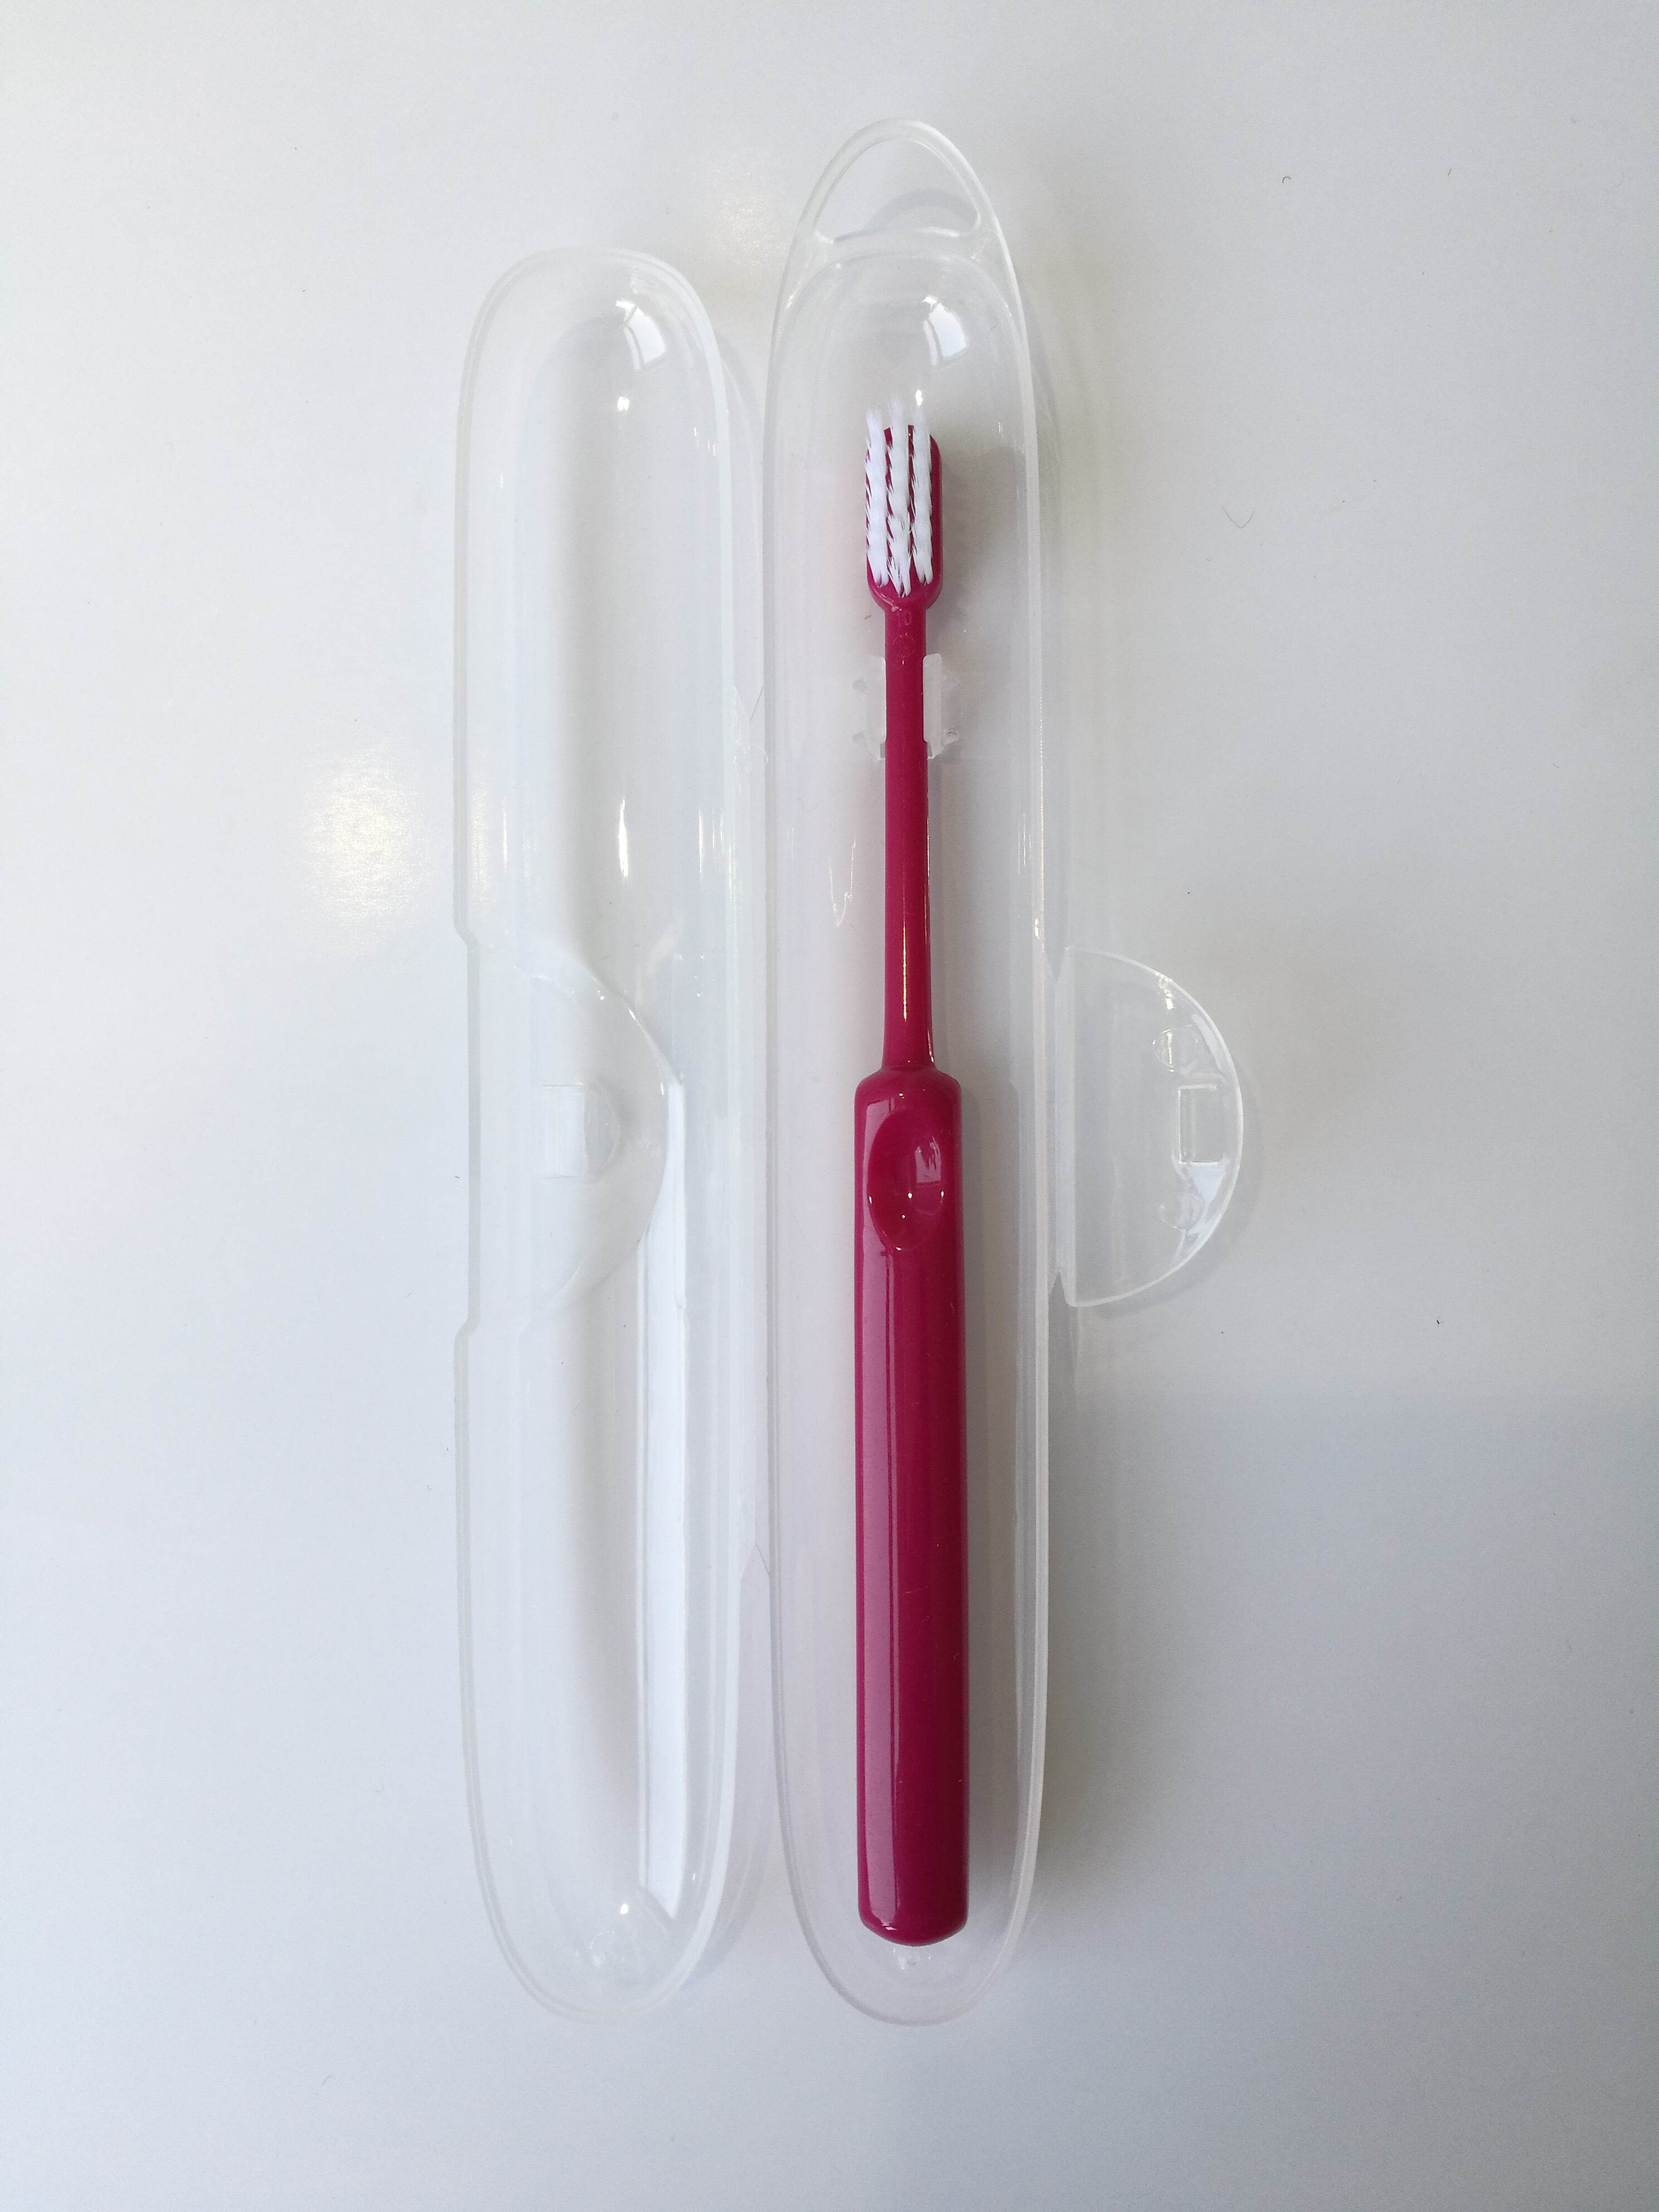 yangzhou new arrival Plastic  Toothpaste Dispenser 2 Cup Magnetic Wall Mount Toothbrush Holder supplier